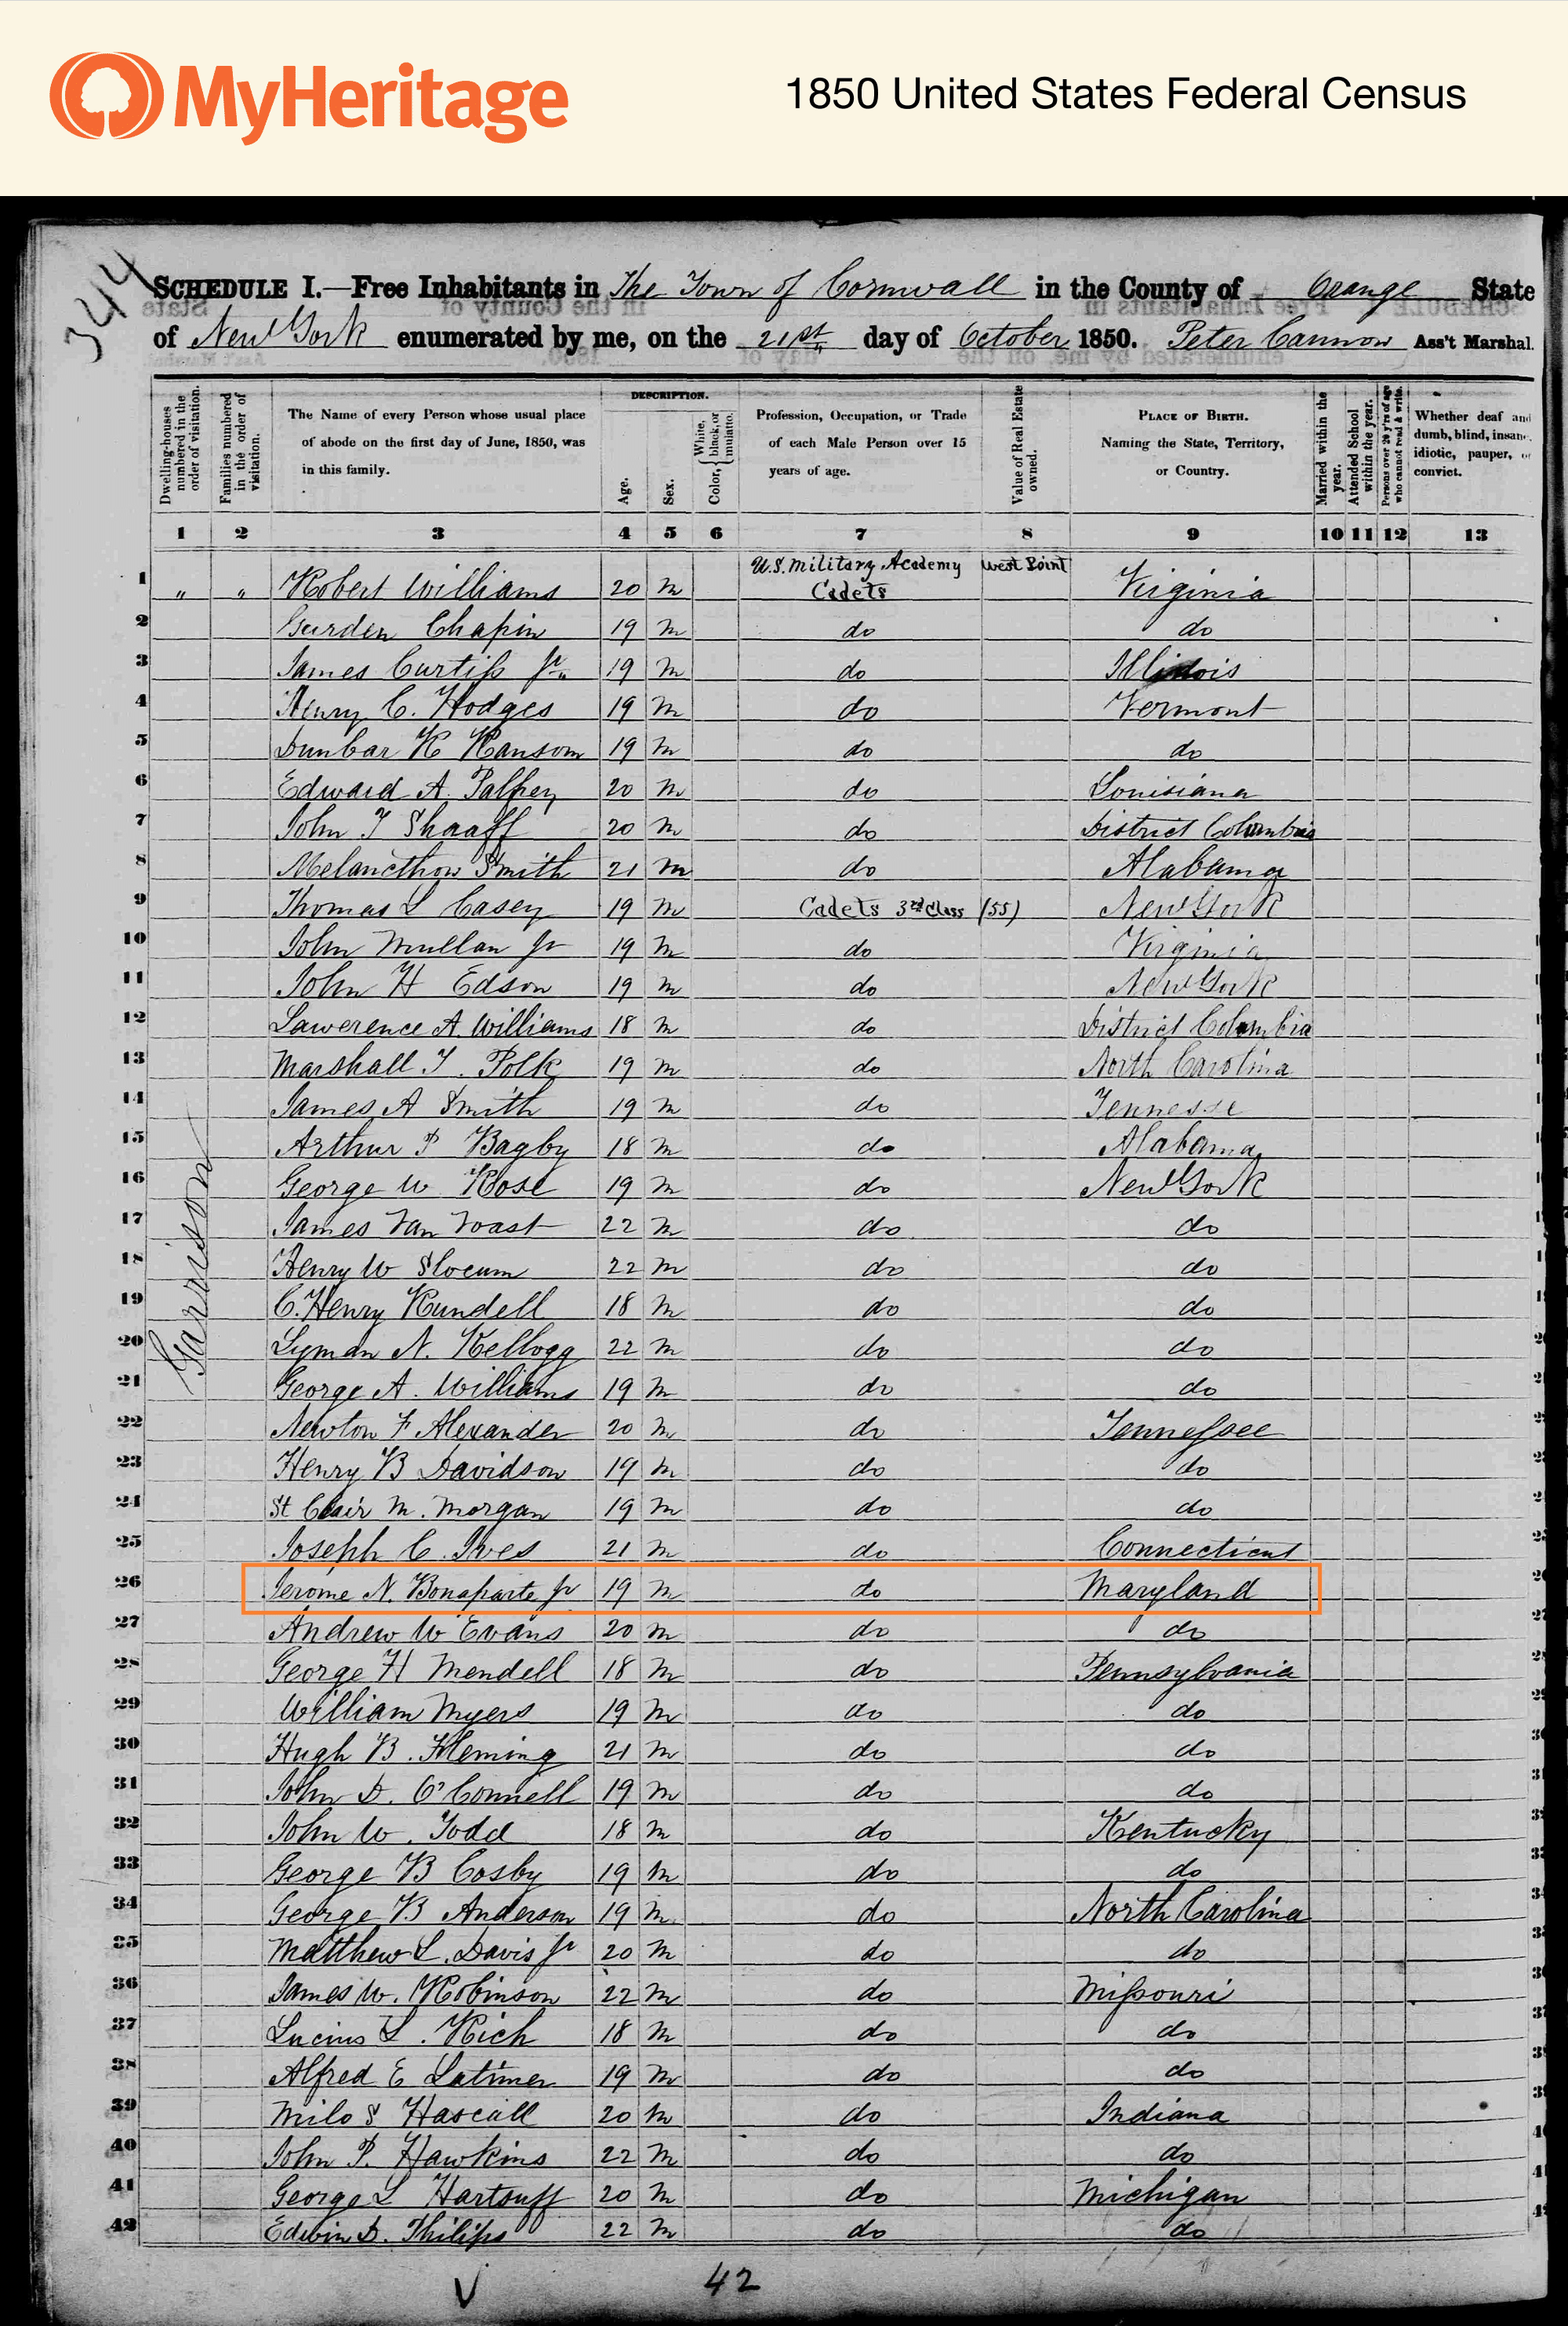 Jerome Napoleon Bonaparte, cadet at West Point, in the 1850 U.S. Census. MyHeritage historical record collections.